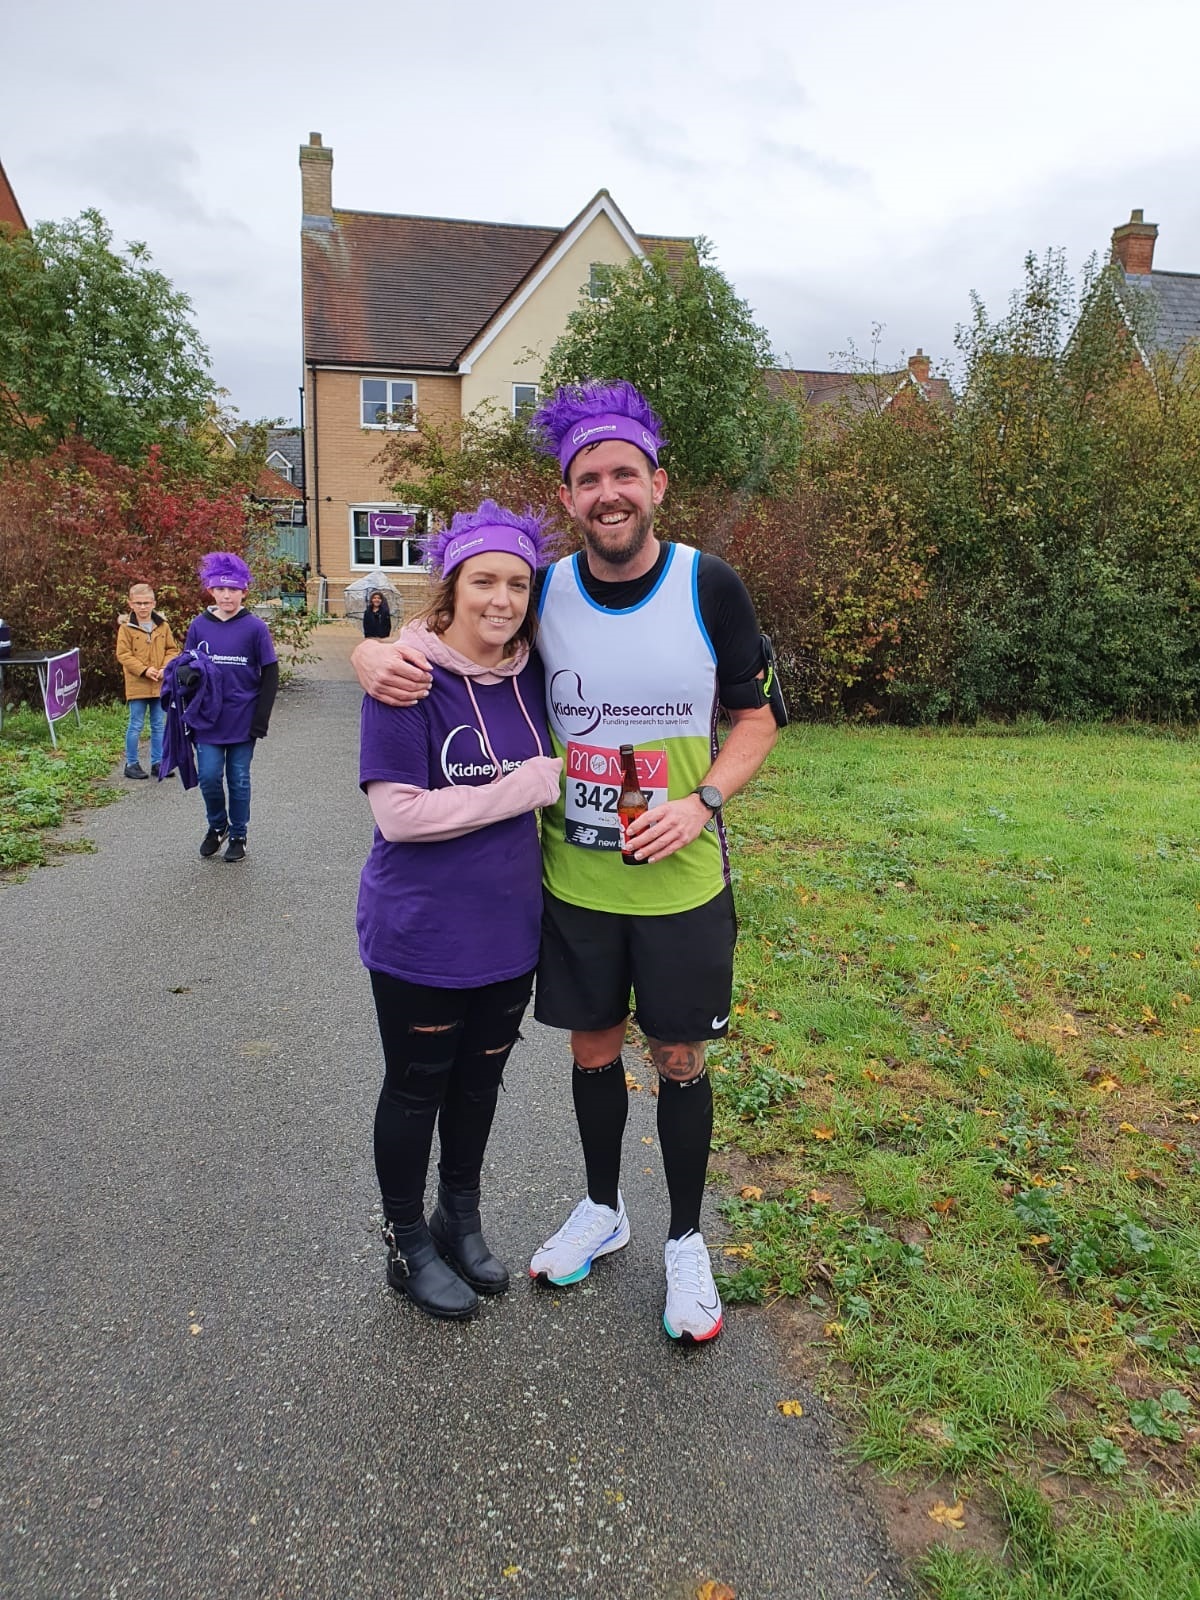 Running machine - Dean Wicks is raising funds for Kidney Research UK